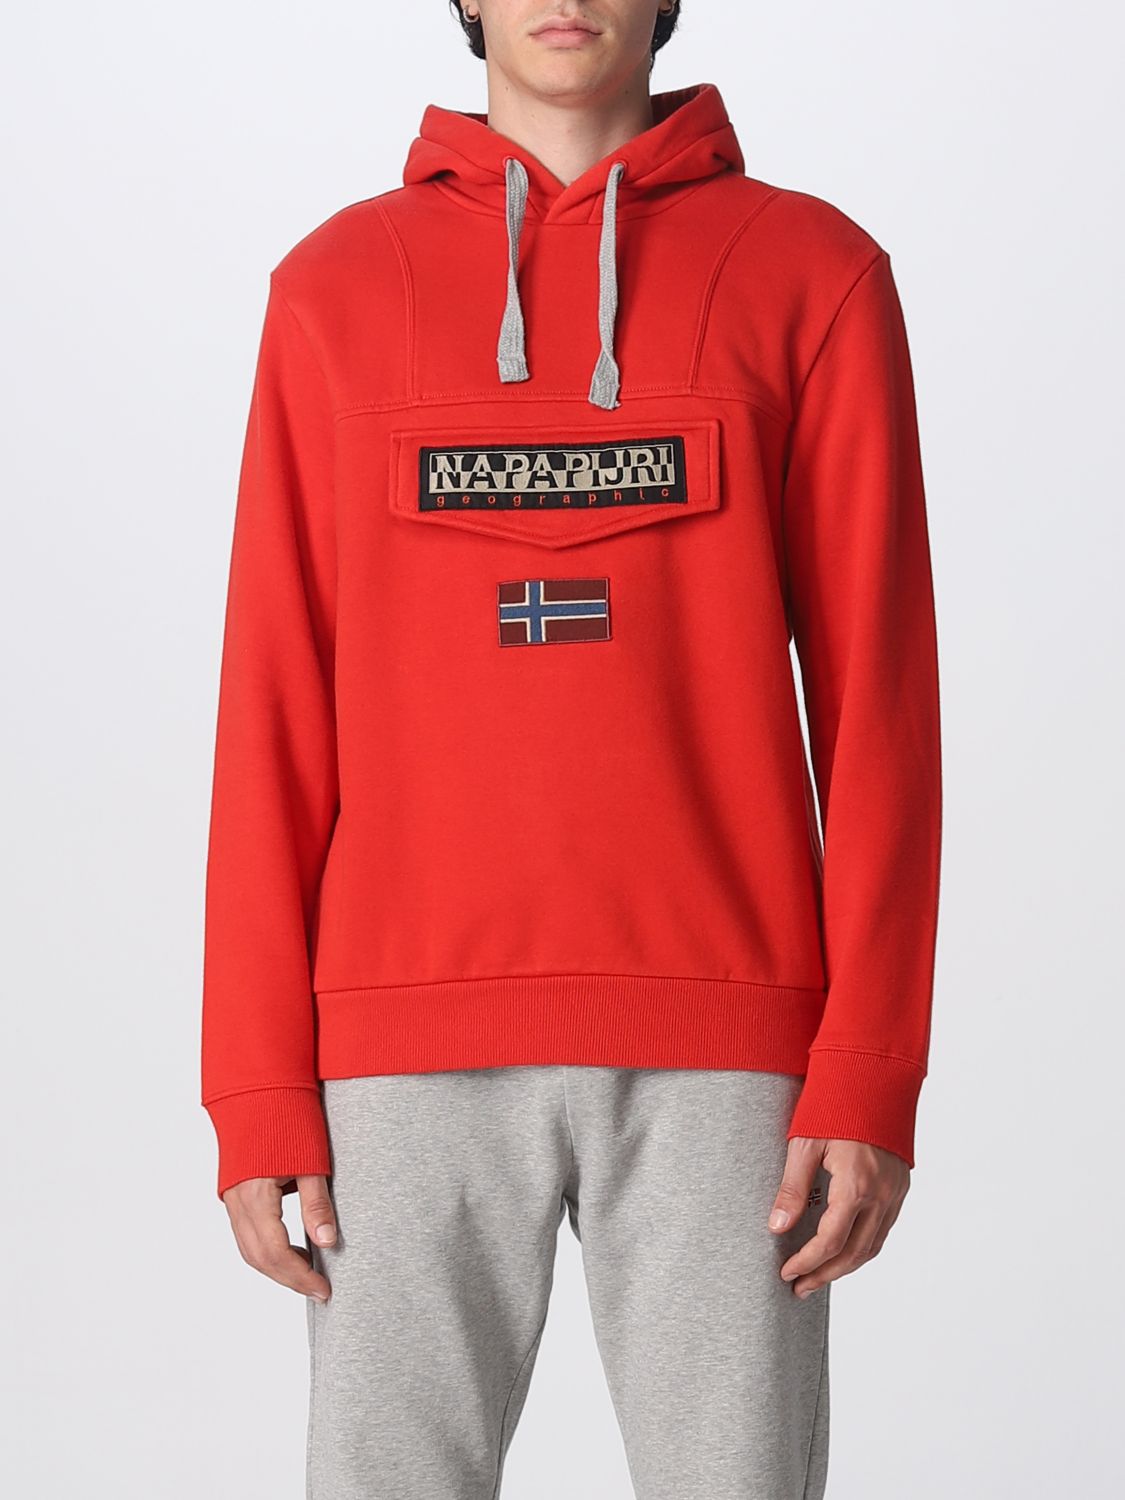 Sweatshirt Napapijri: Sweatshirt Napapijri homme rouge 1